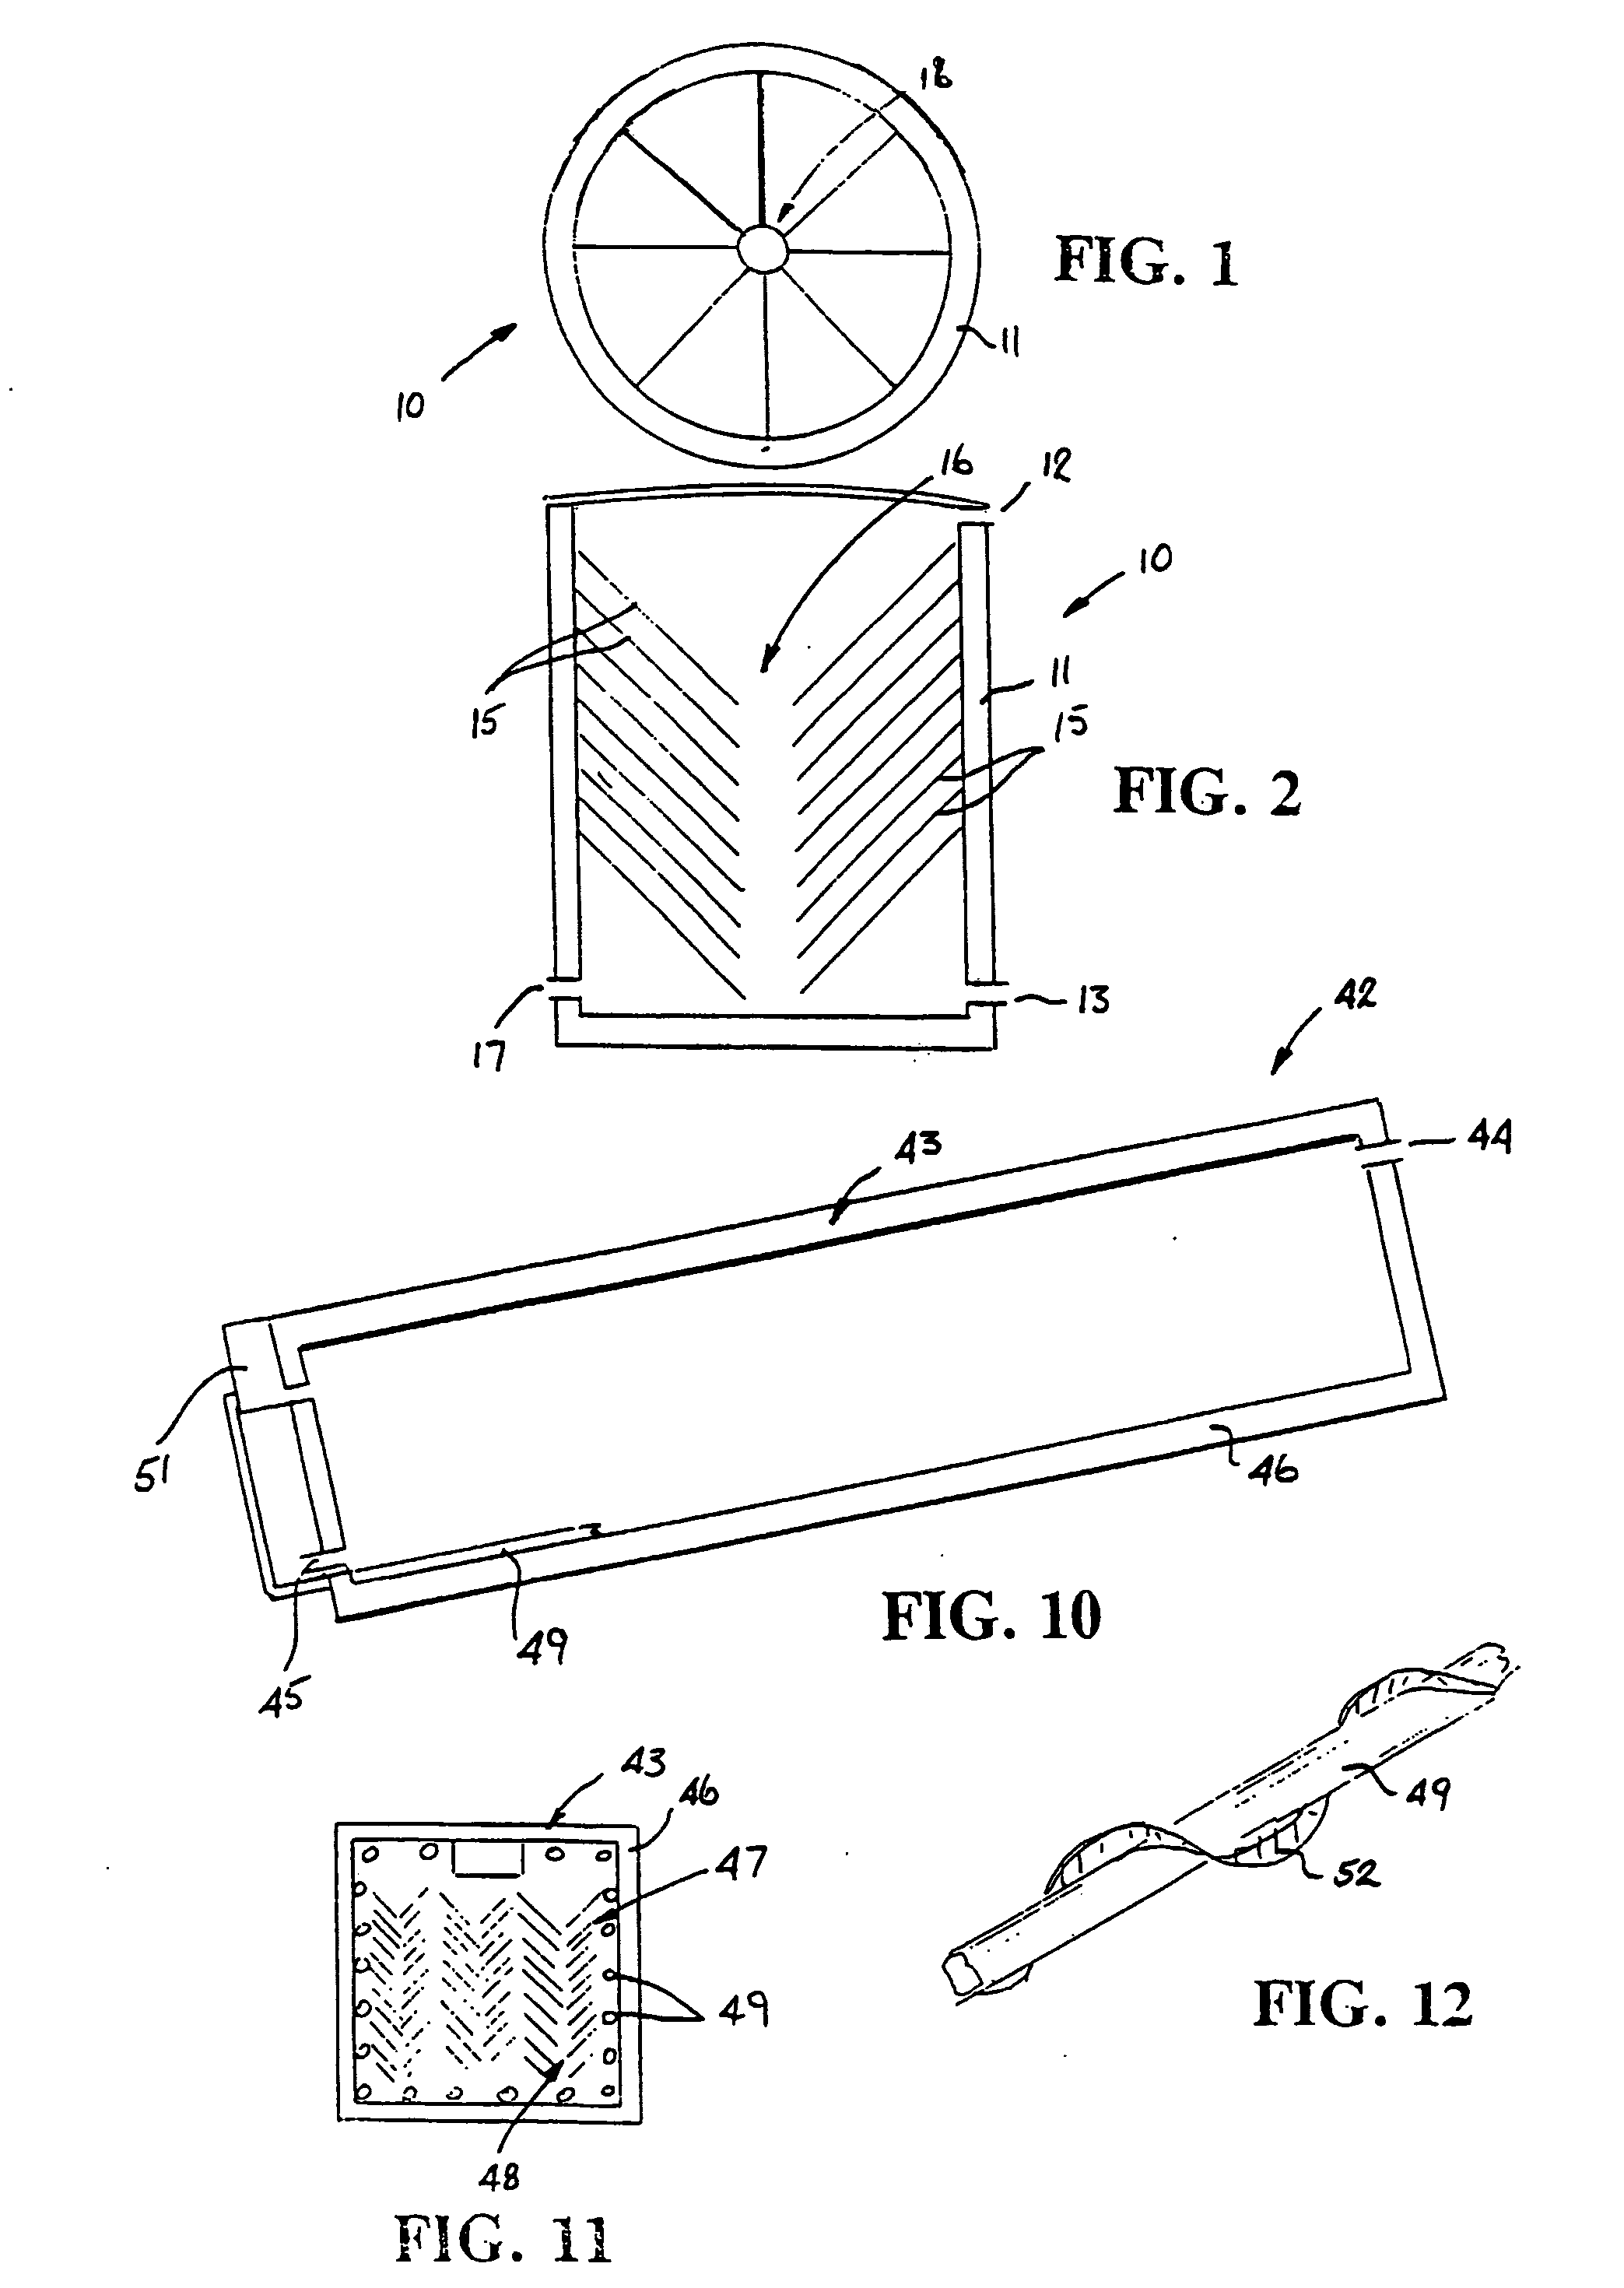 Method and apparatus for collecting atmospheric moisture